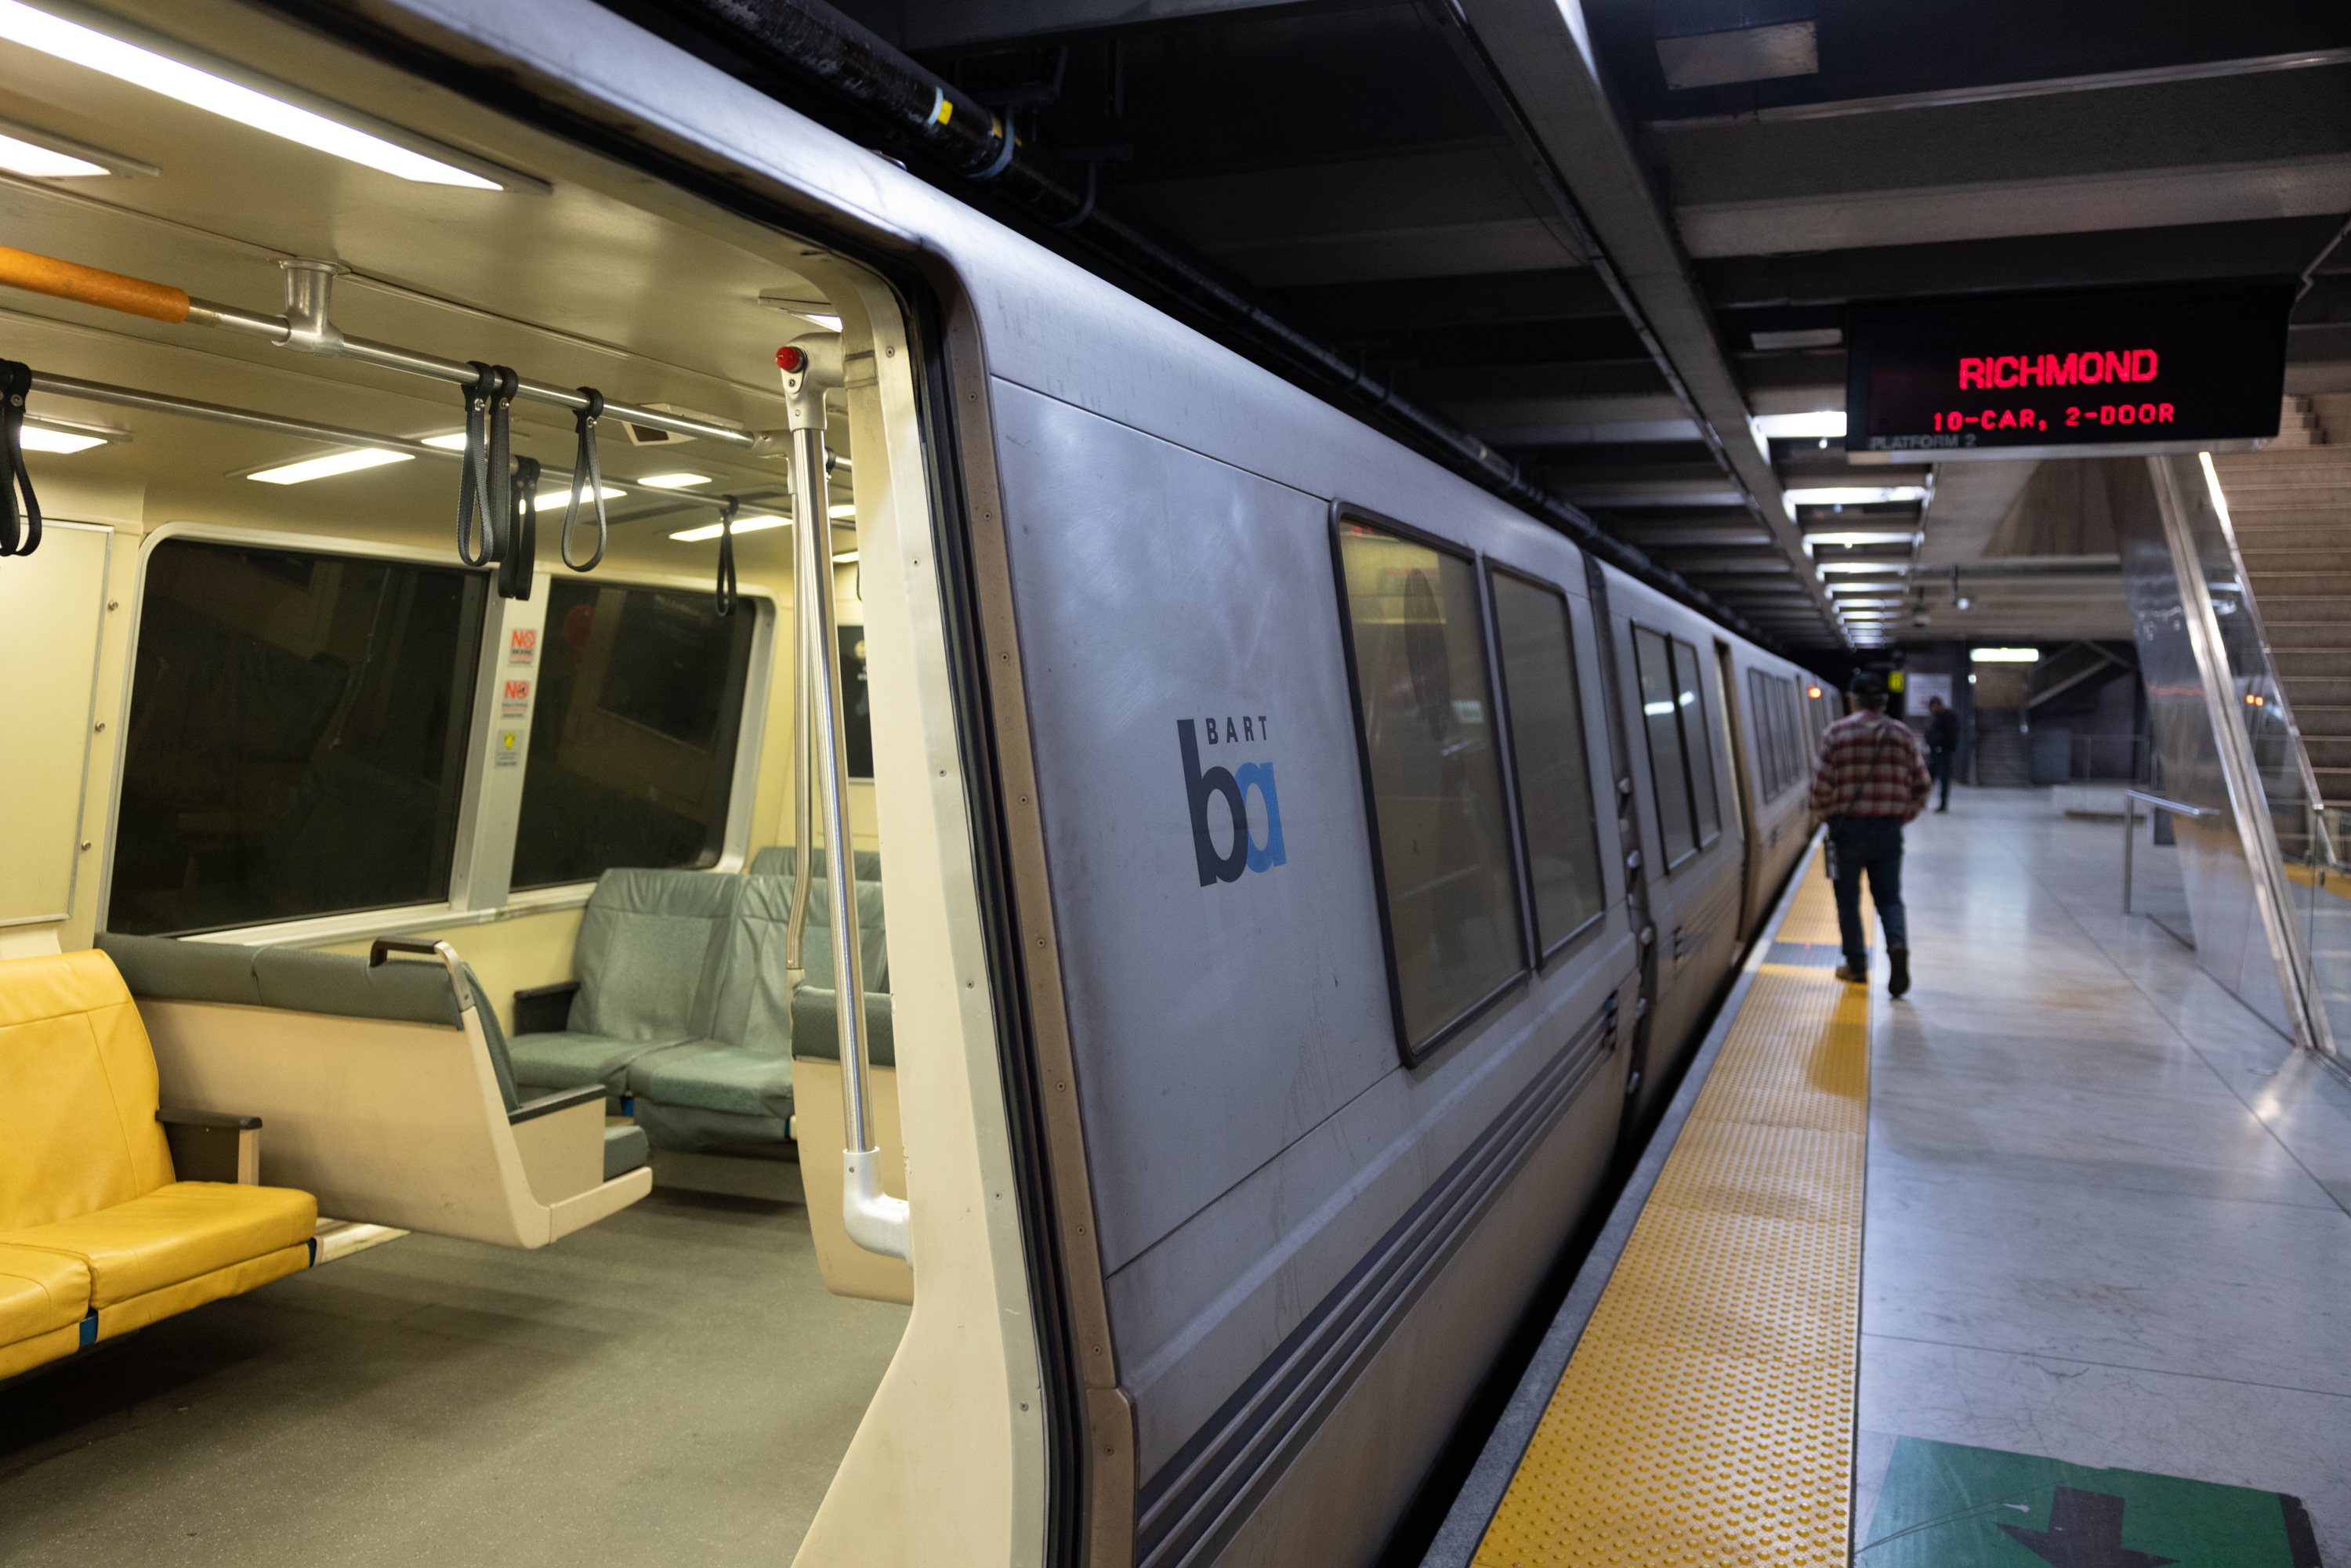 A BART train with an open door at an underground station.